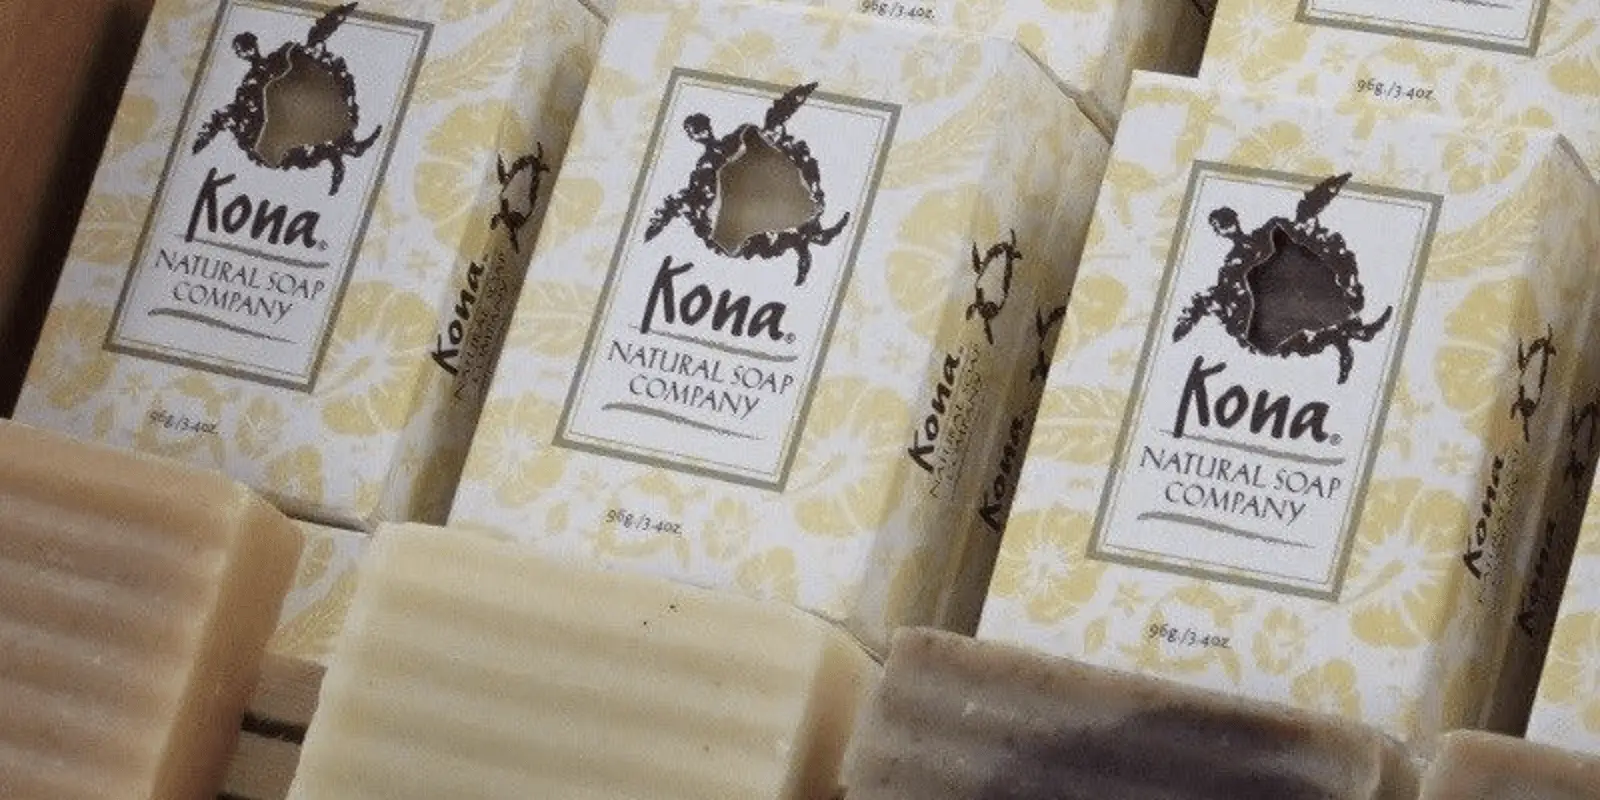 Boxes of Kona Natural Soap Company products displayed, featuring a turtle image on the packaging. Various bars of soap in front showcase different colors and textures, suggesting a variety of soap types. The background includes more Kona Natural Soap Company boxes partially visible.